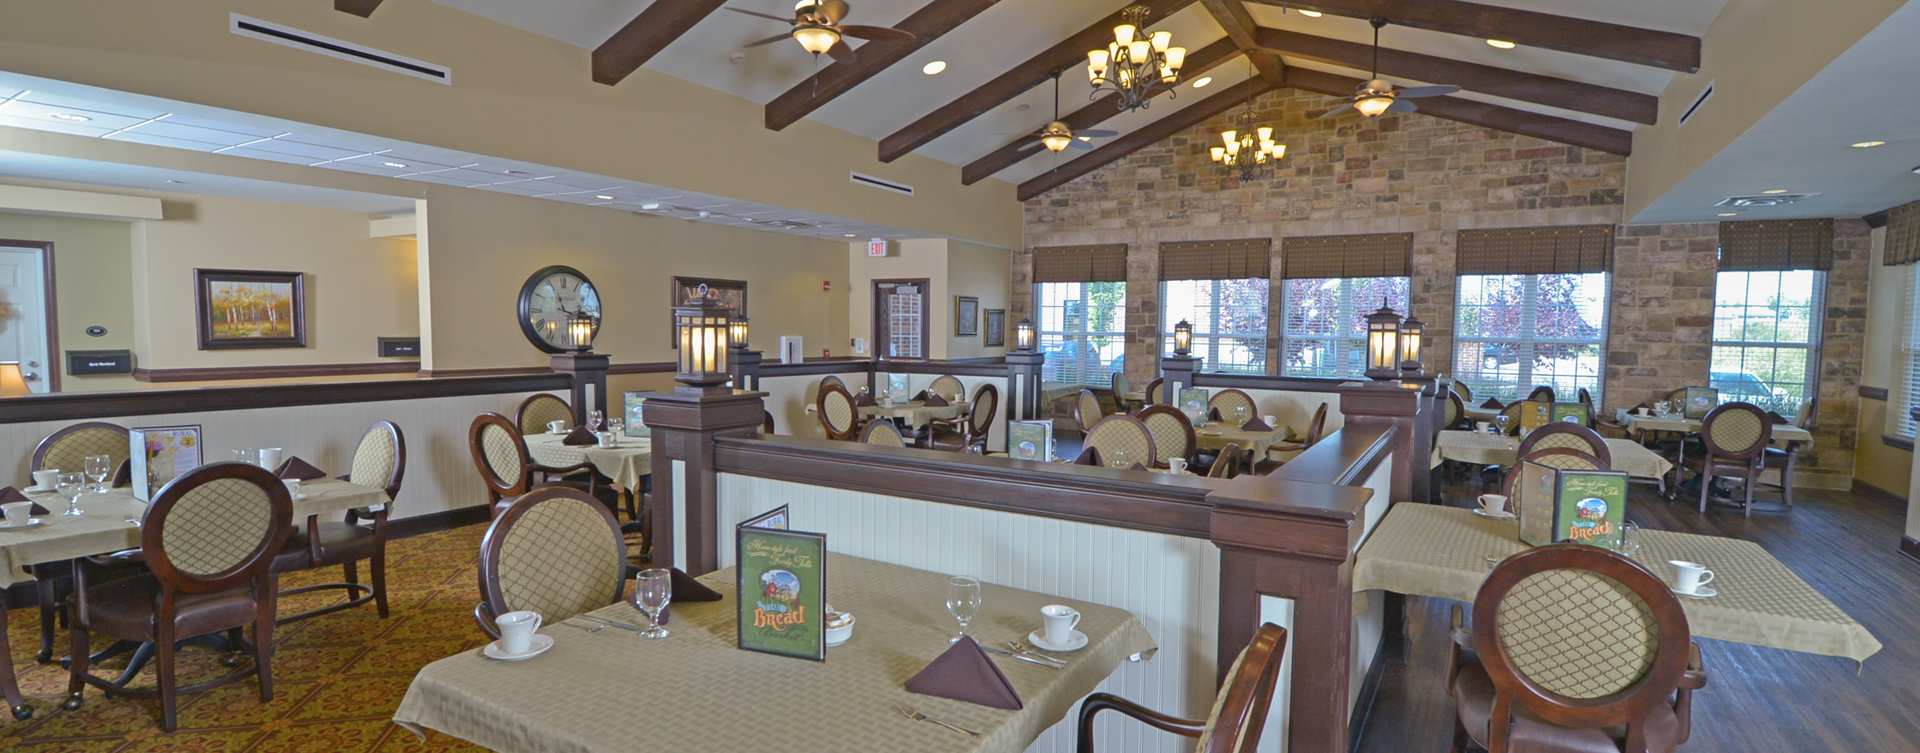 Enjoy homestyle food with made-from-scratch recipes in our dining room at Bickford of Crown Point